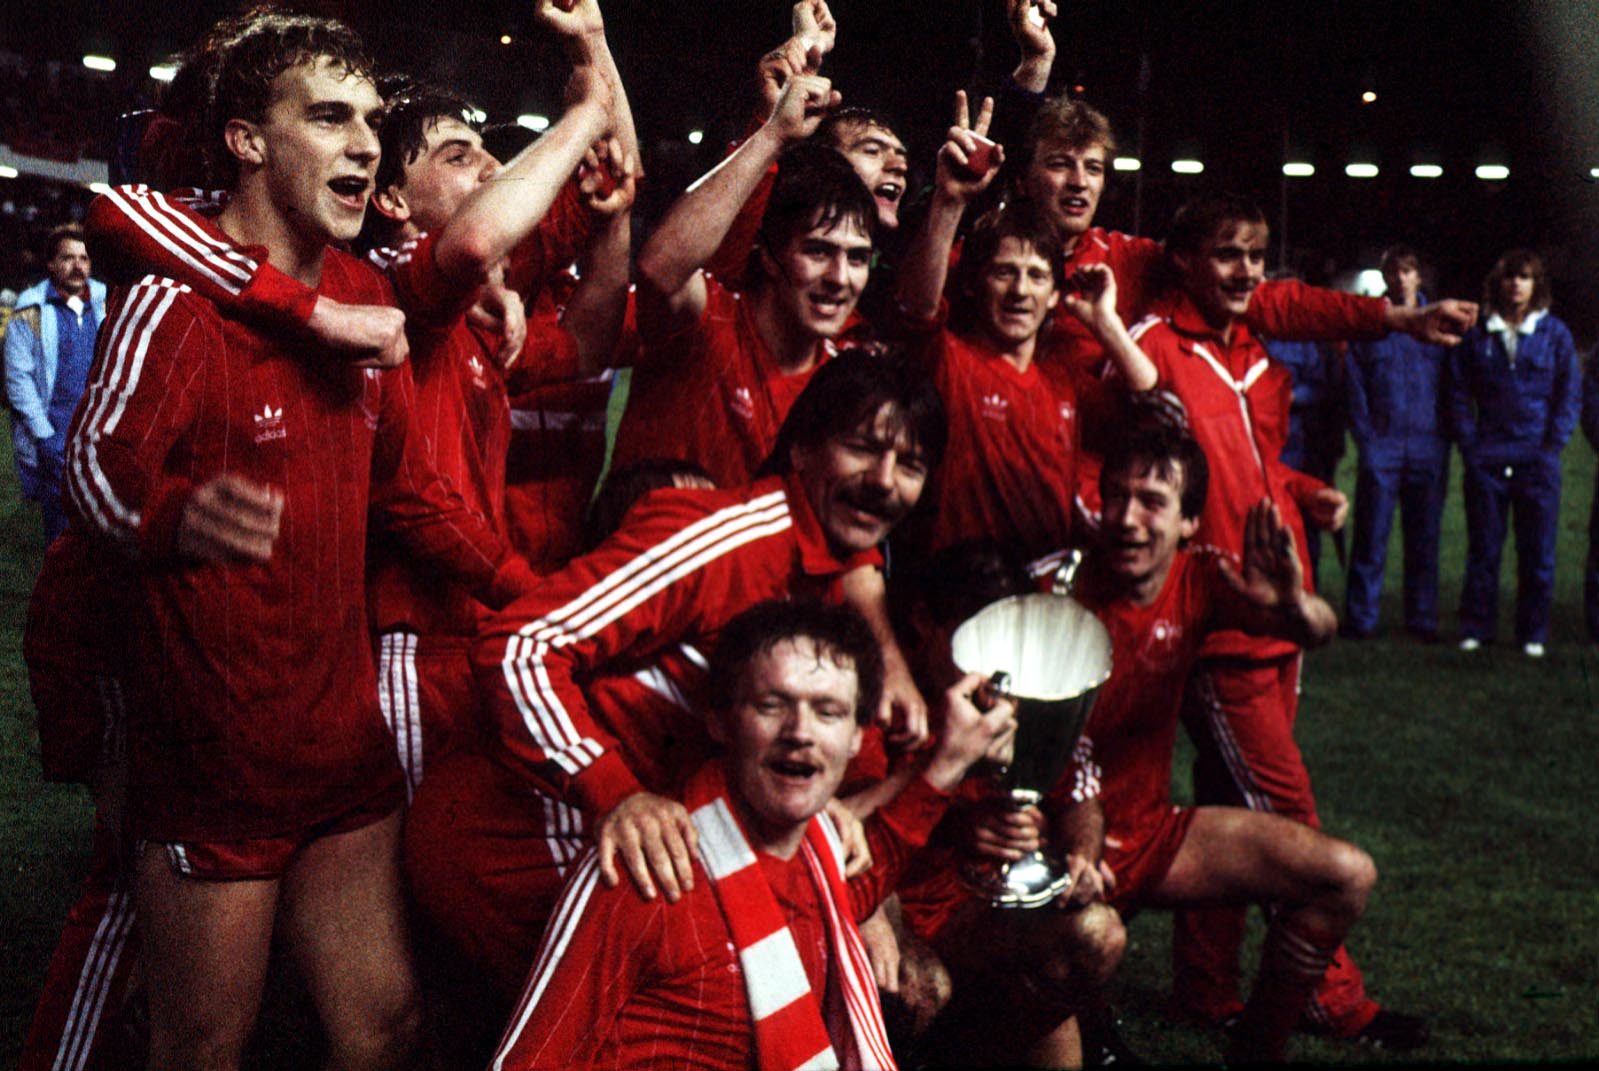 Aberdeen won 2-1 to claim the Cup-Winners' Cup.